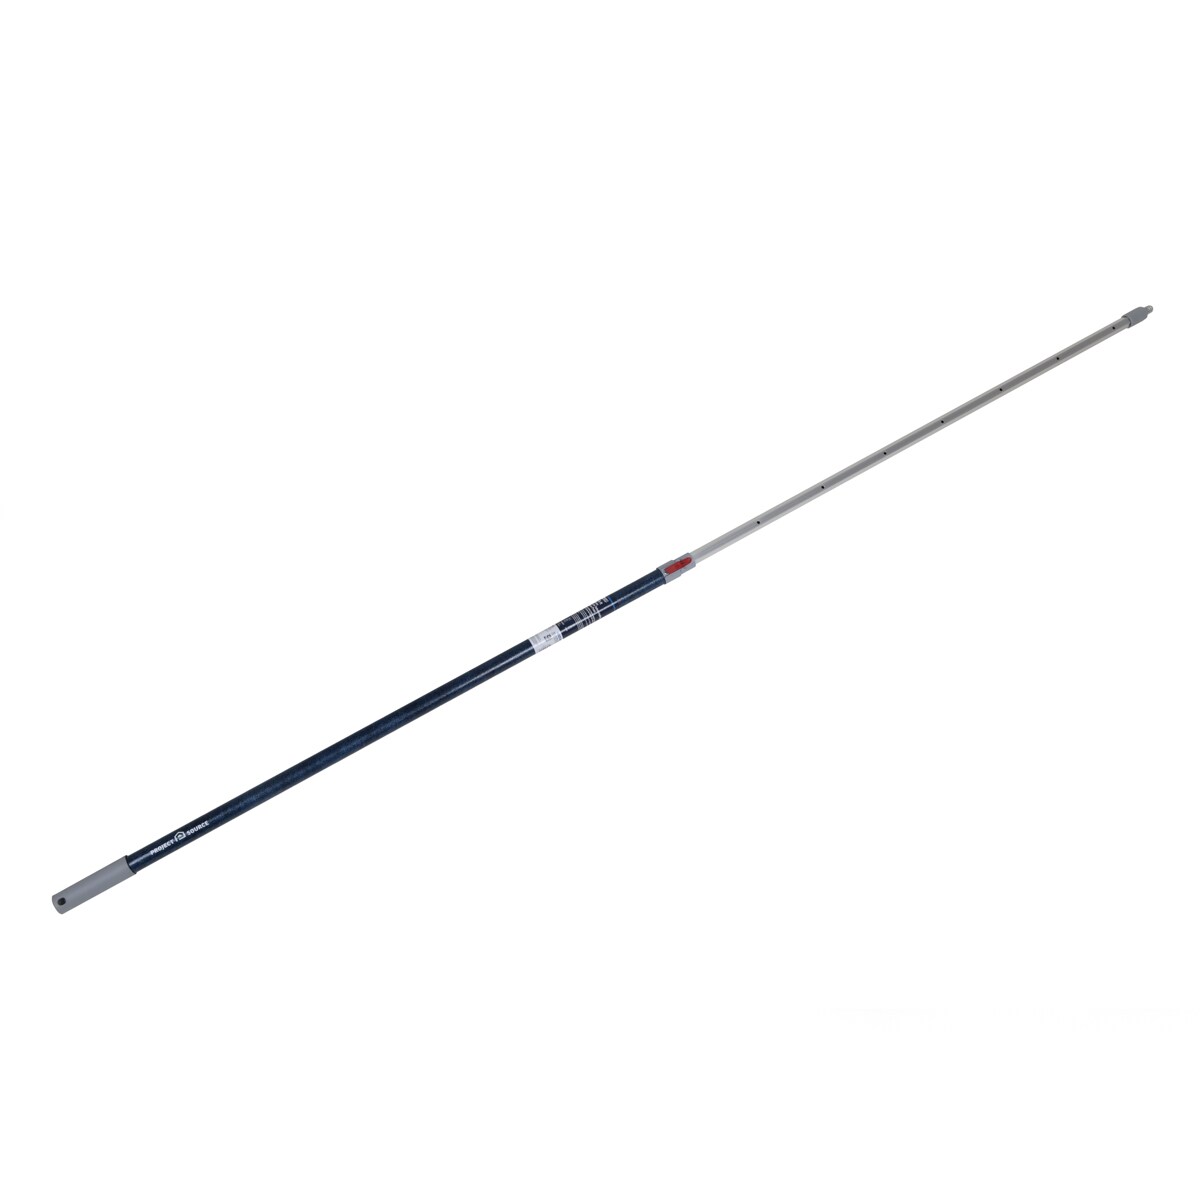 Premier Steel Extension Pole with Threaded Tip - 4 ft